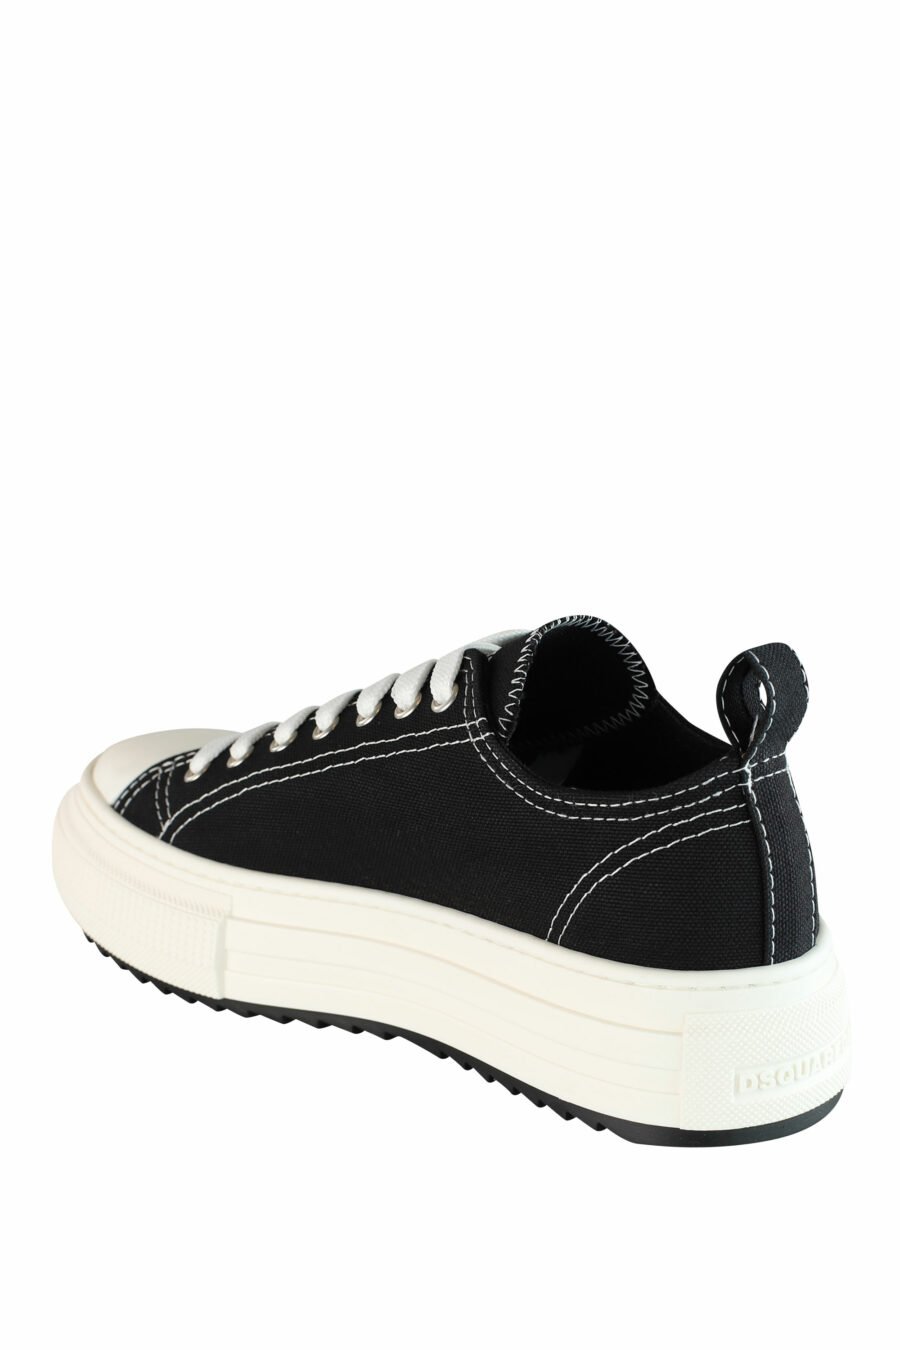 Black "berlin" trainers with platform and white mini-logo - IMG 1386